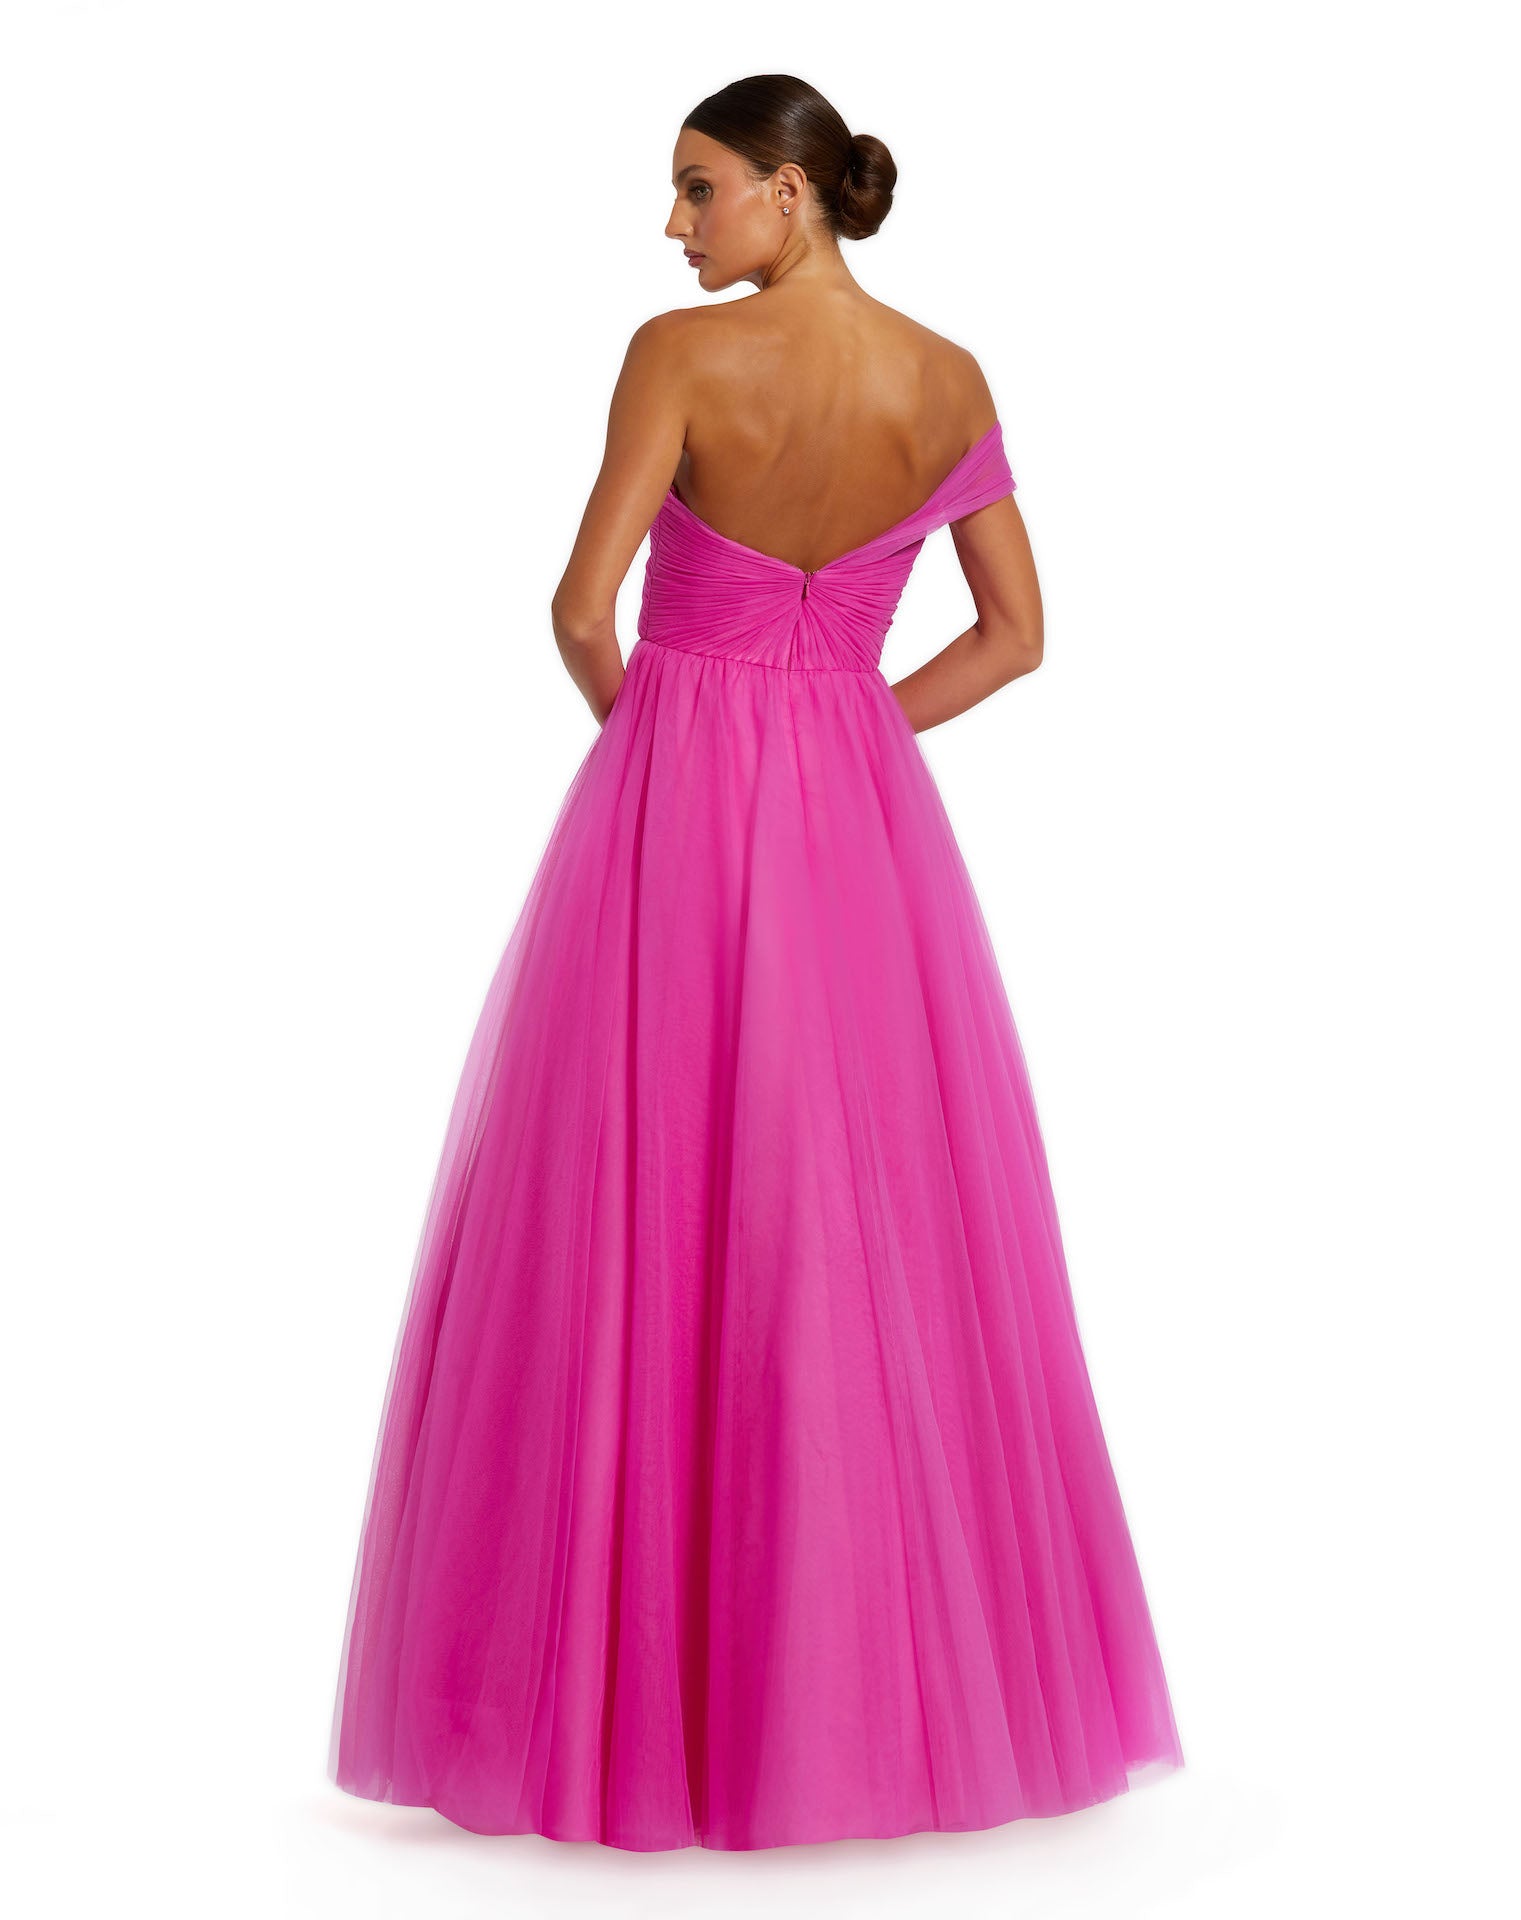 One Side Off the Shoulder Bustier Ball Gown